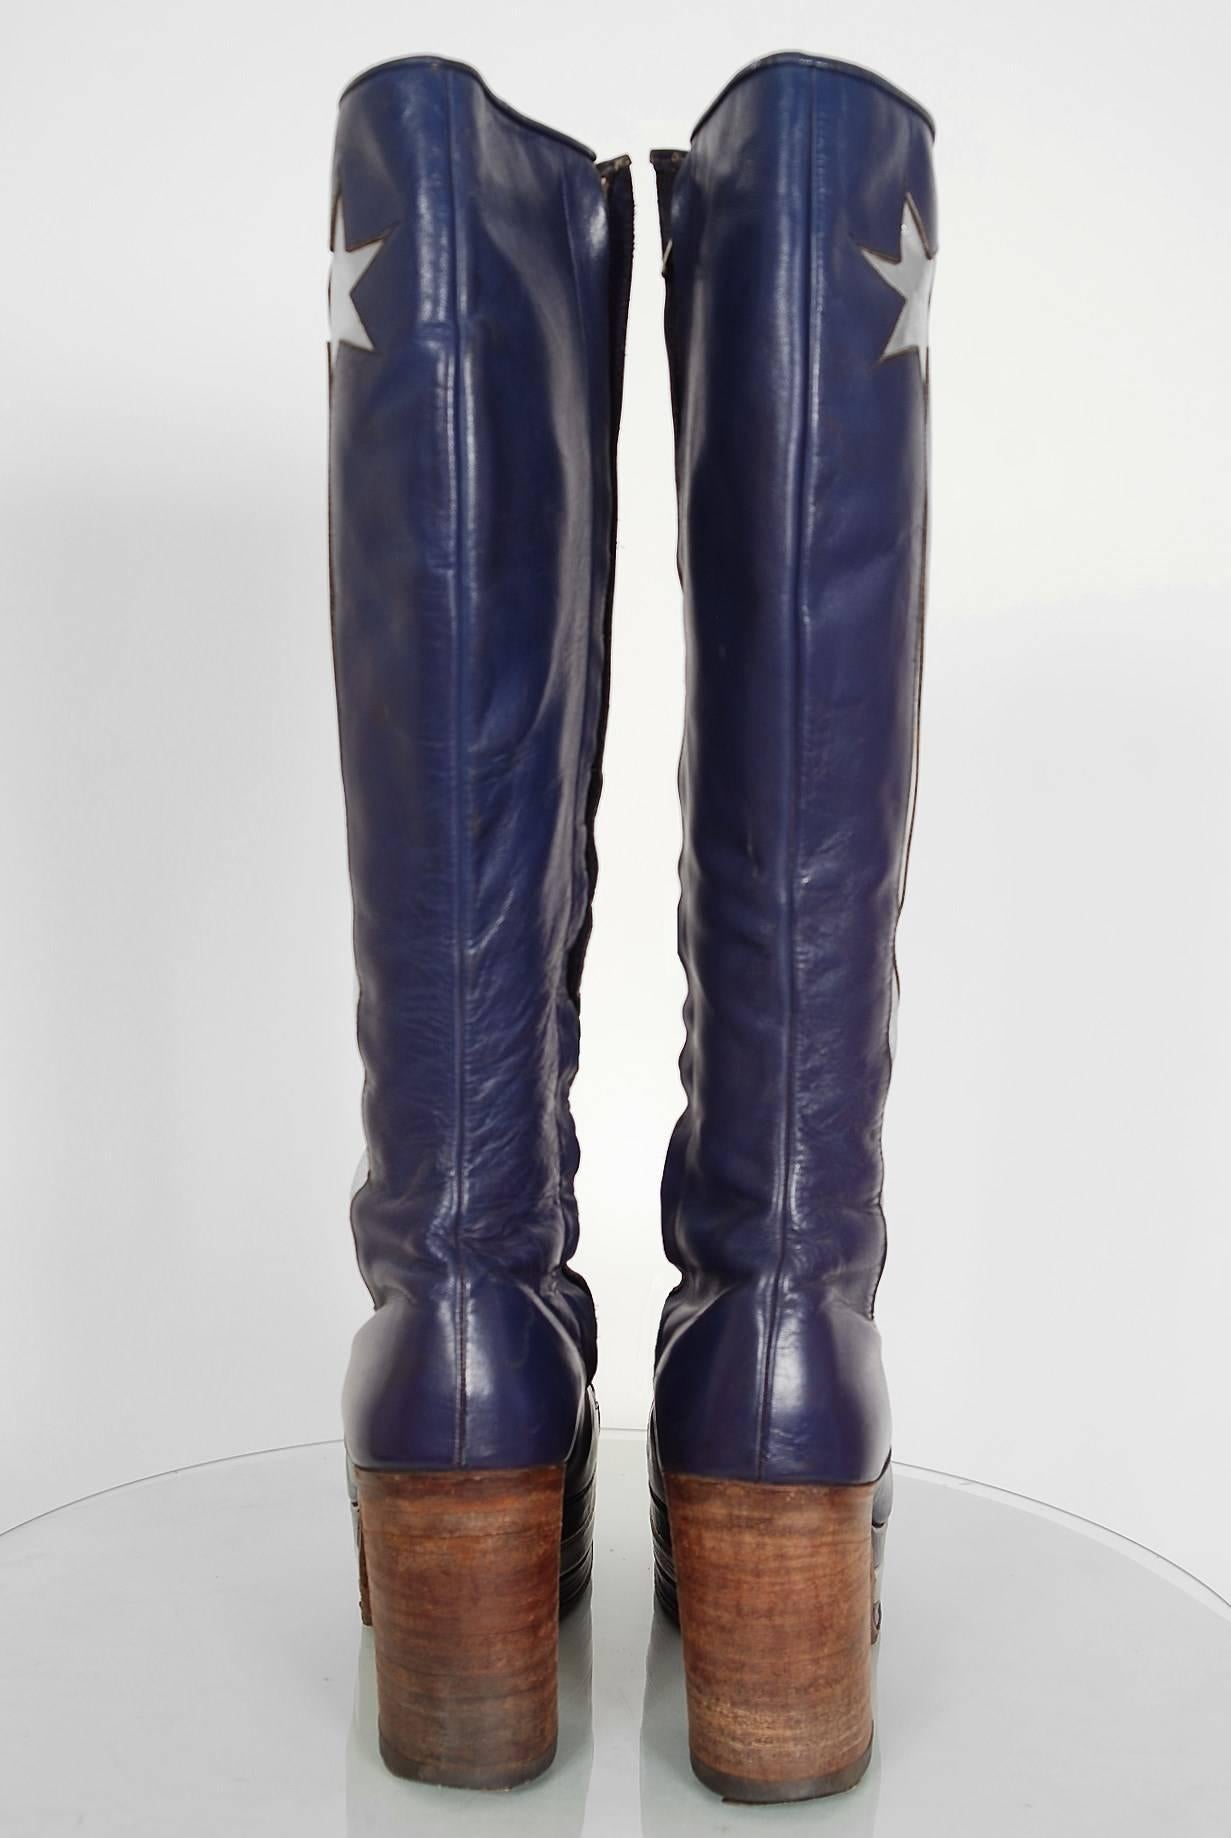 70s glam rock boots